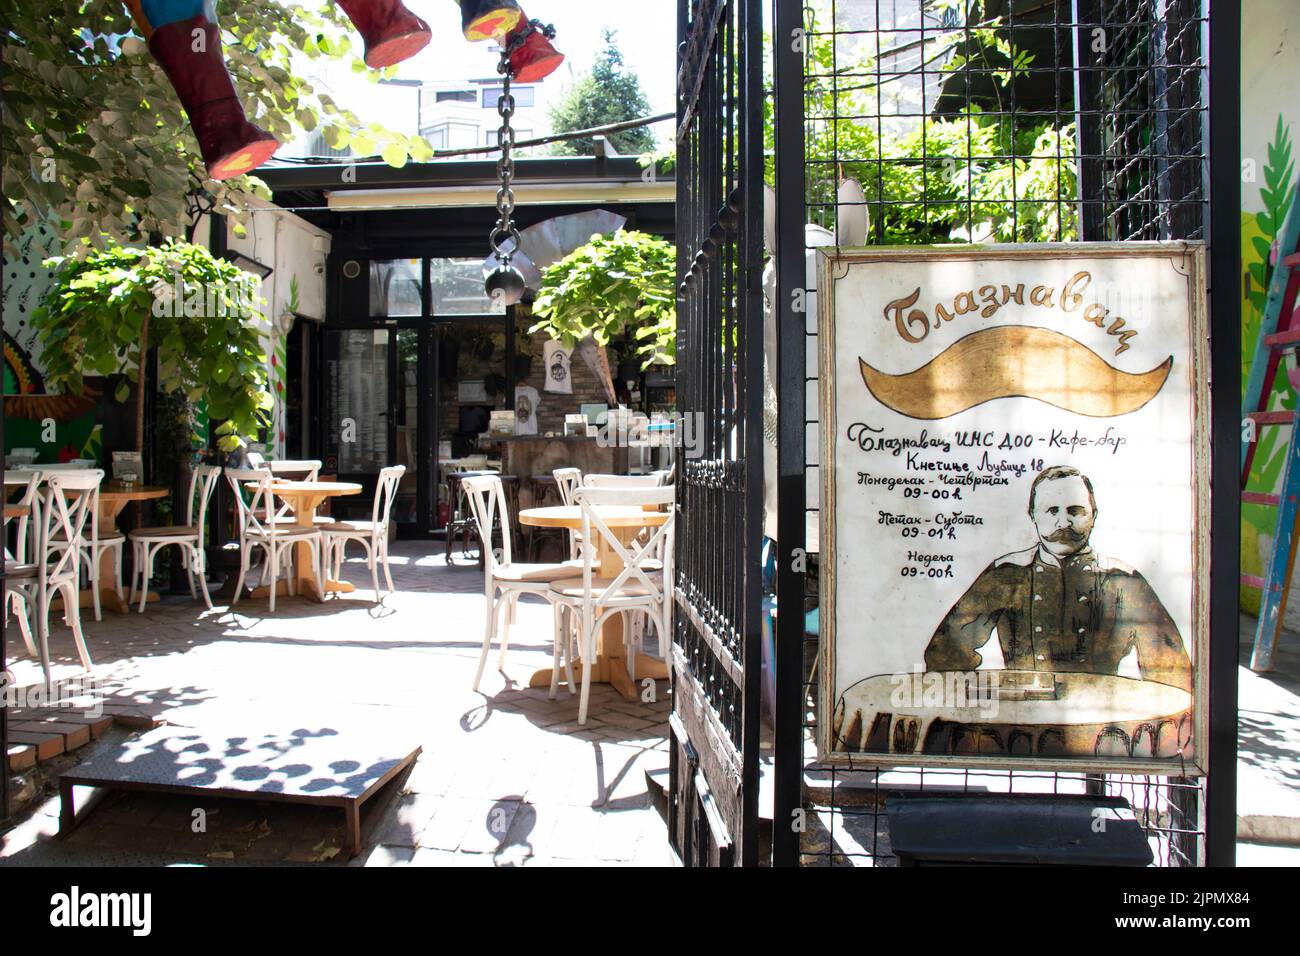 Belgrade-Serbia - June 15, 2022: Entrance to the garden of cafe-bar Blaznavac with outdoor sign board and chairs and tables inside a sunny garden Stock Photo